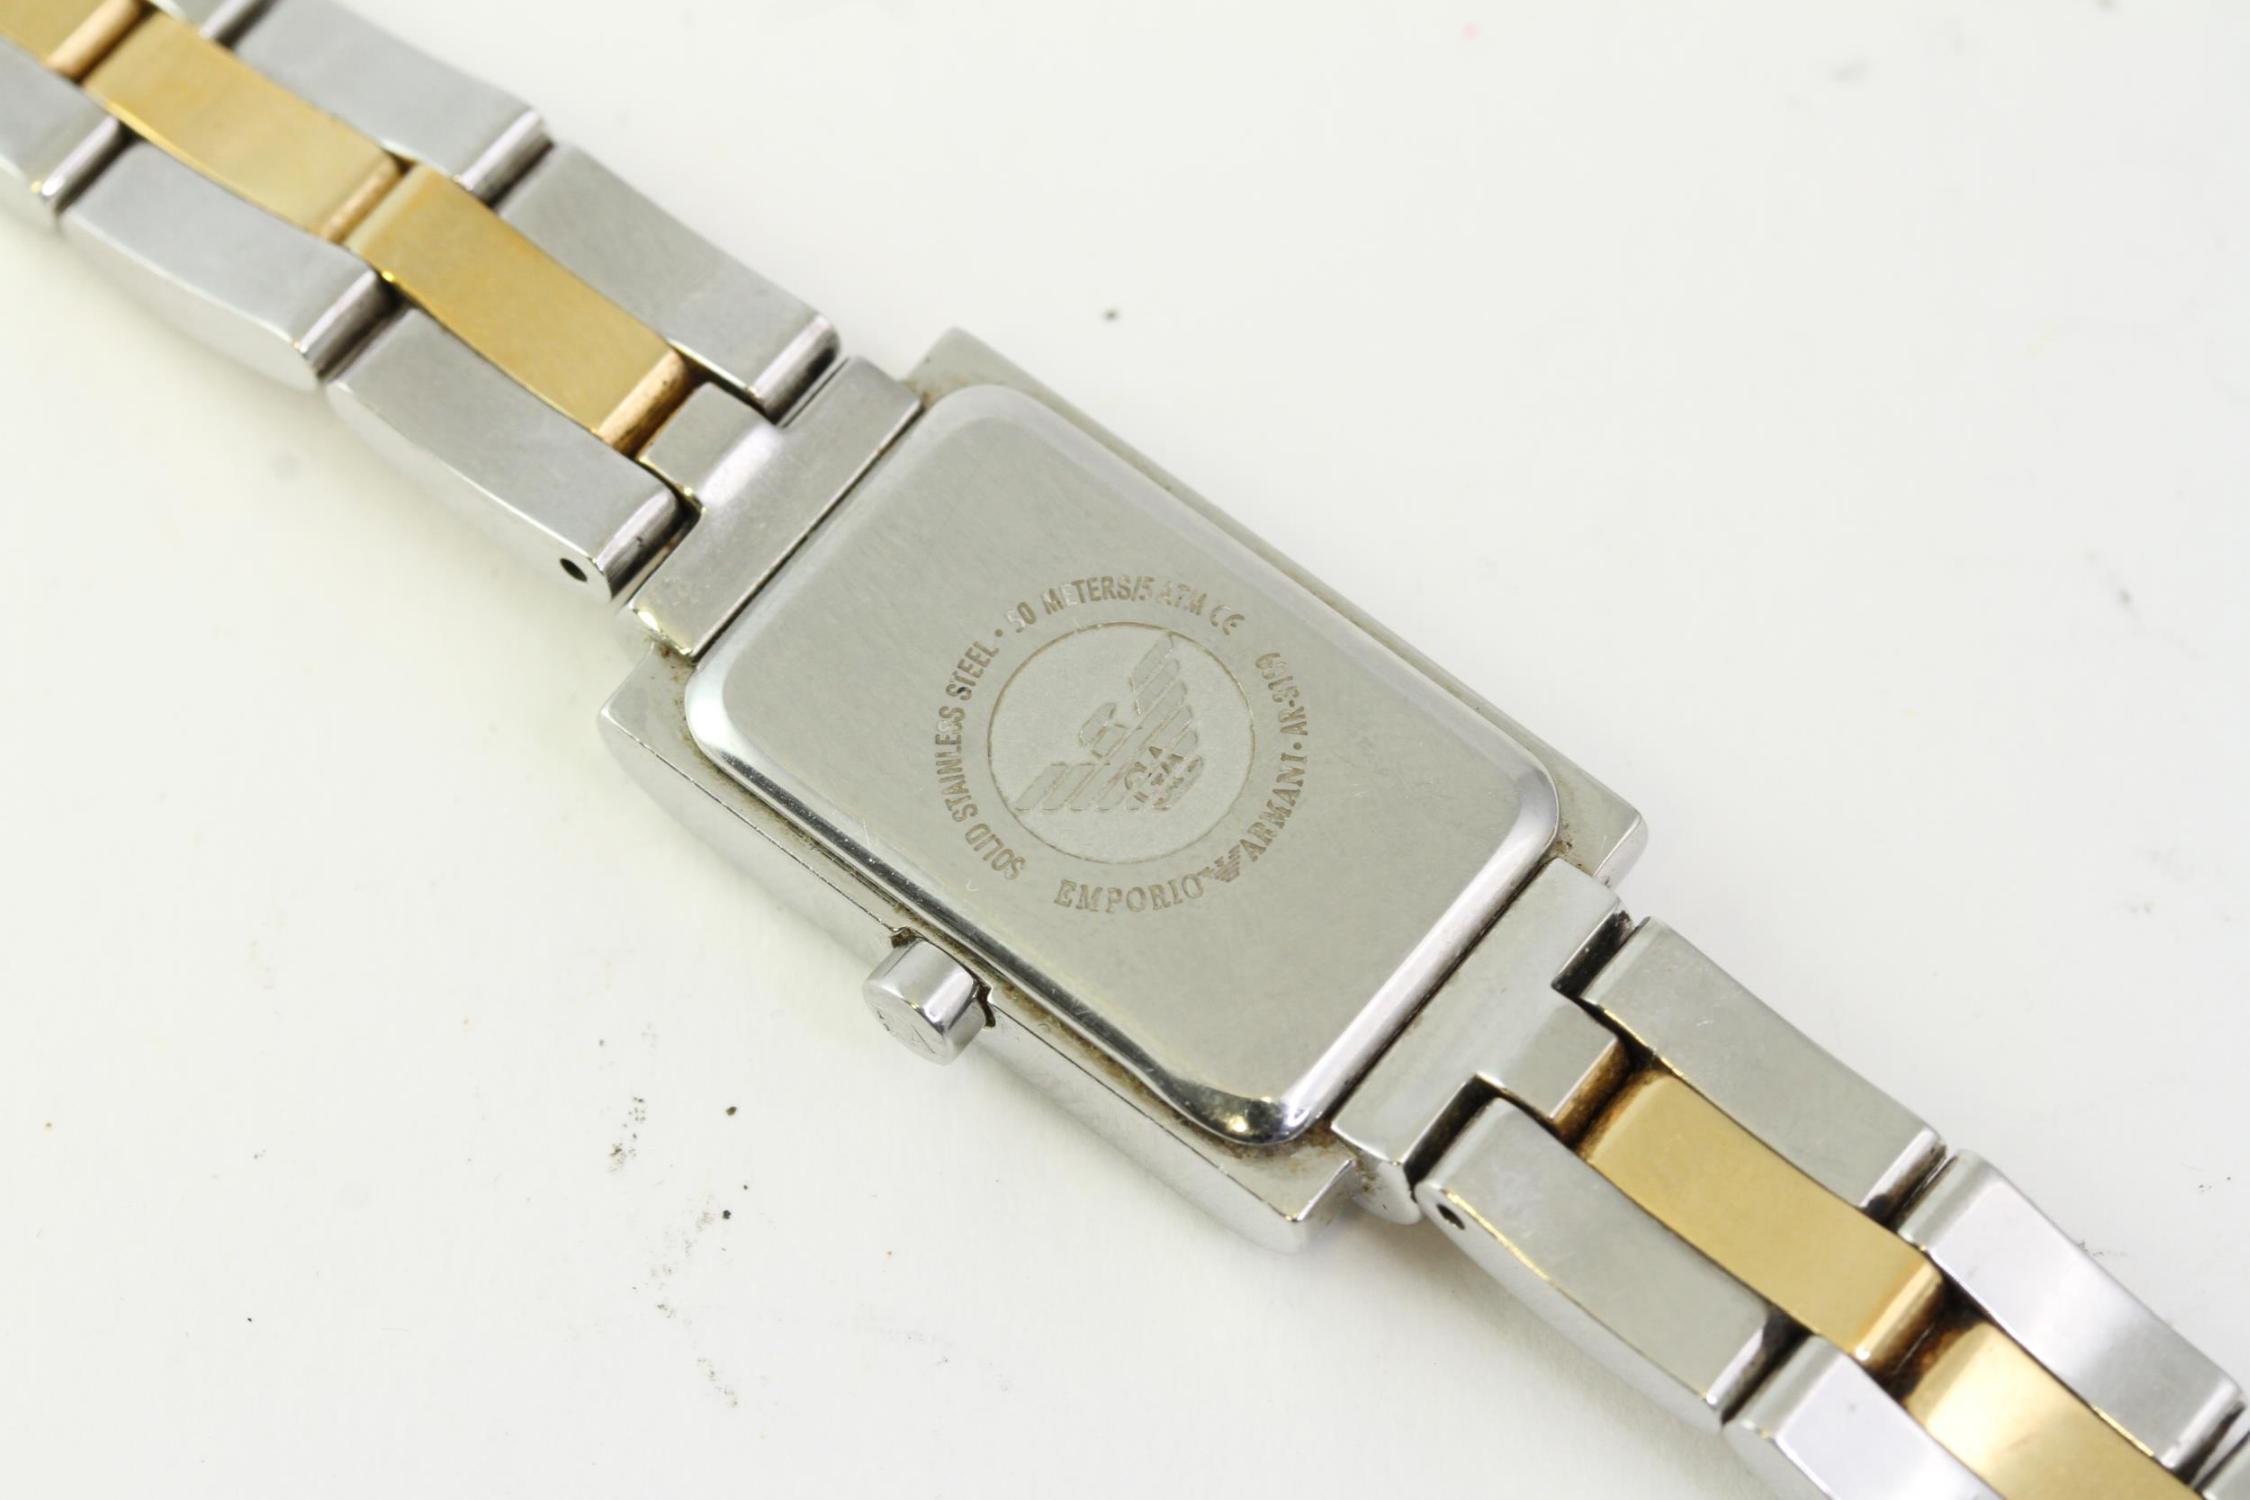 LADIES EMPORIO ARMANI MOTHER OF PEARL QUARTZ WATCH, rectangular mother of pearl dial with - Image 3 of 3